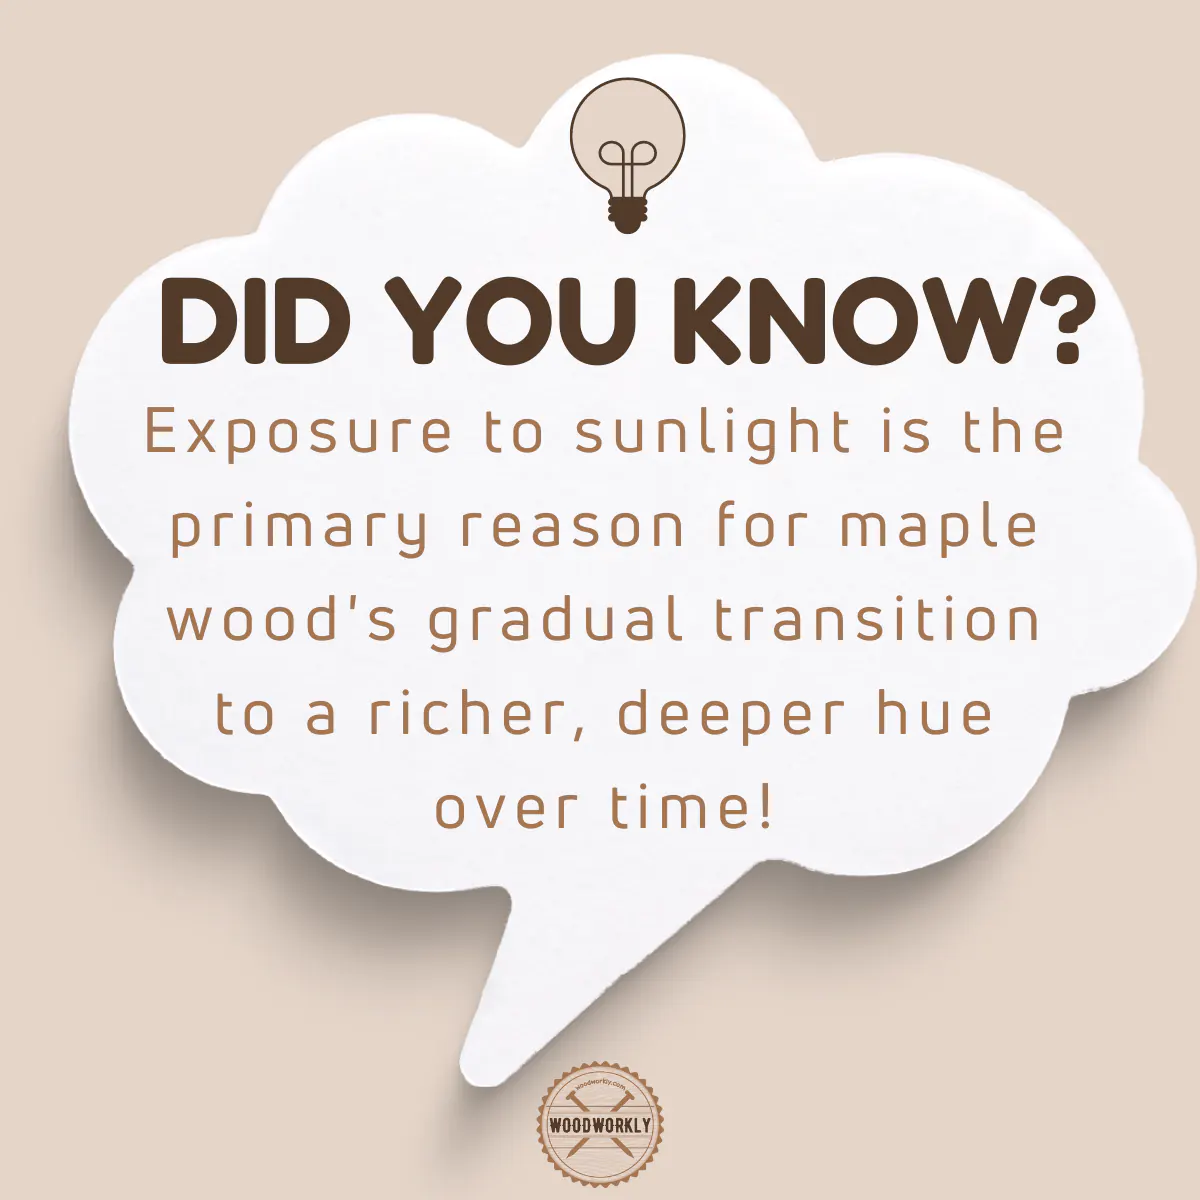 Did you know fact about Maple Wood Darkening